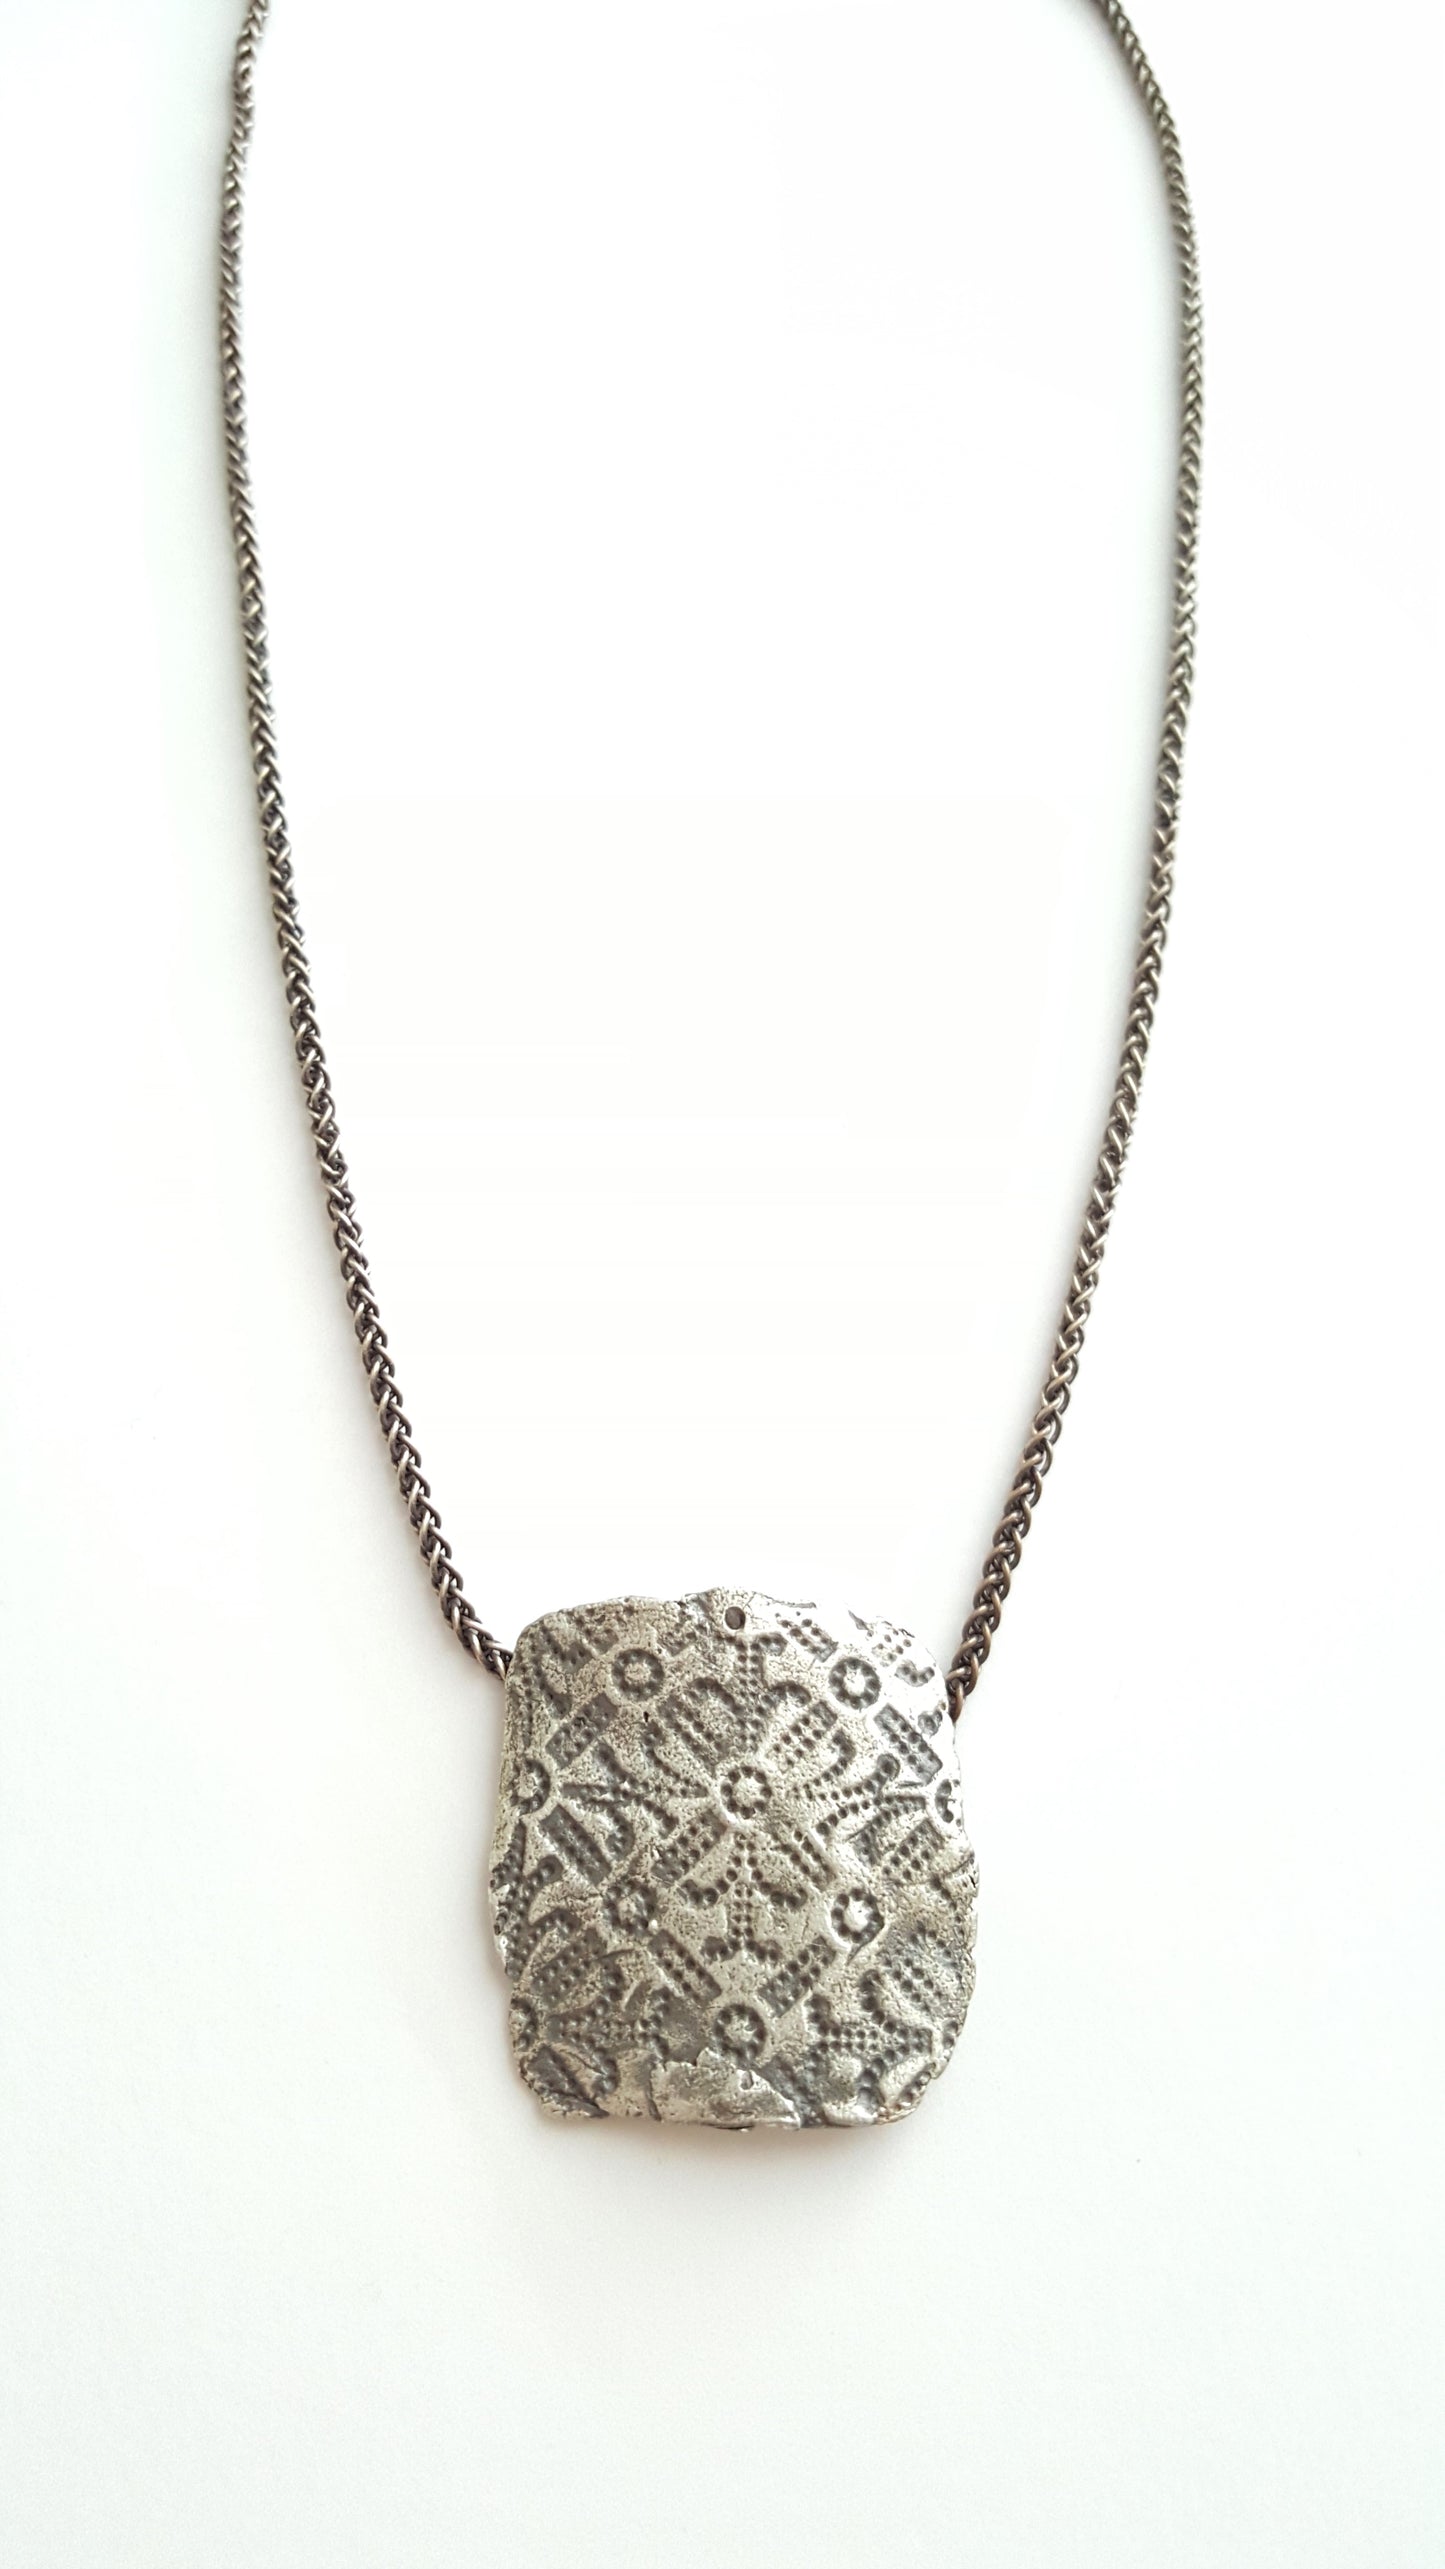 Stamped Pendant by Gwen Park